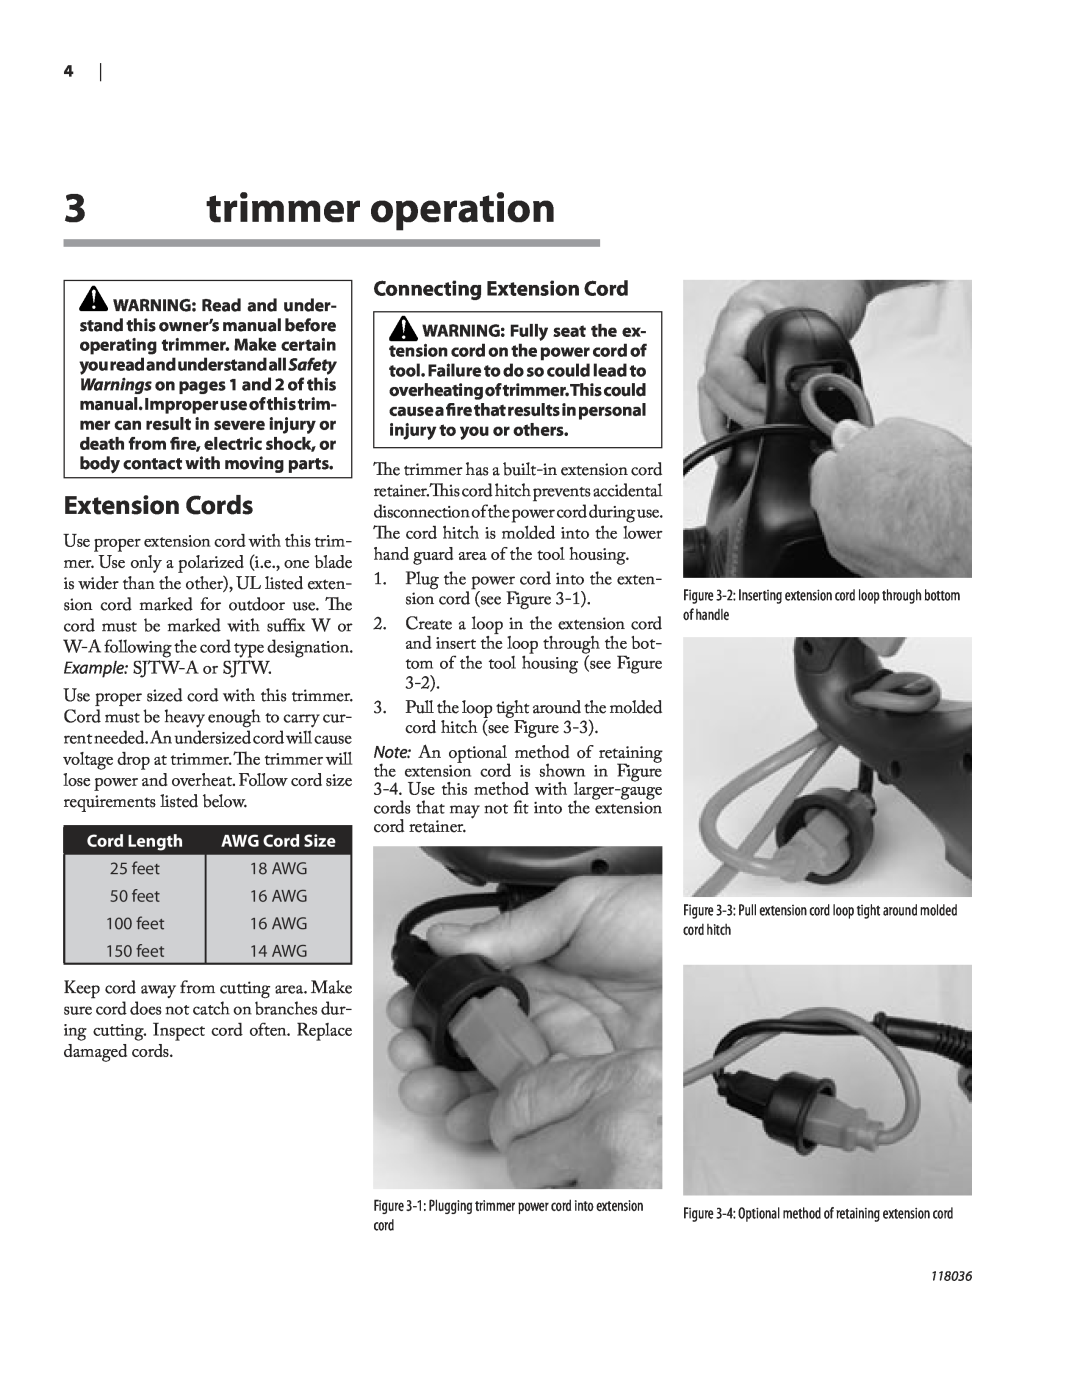 Remington HT3218A, HT4022A owner manual trimmer operation, Extension Cords, Connecting Extension Cord 